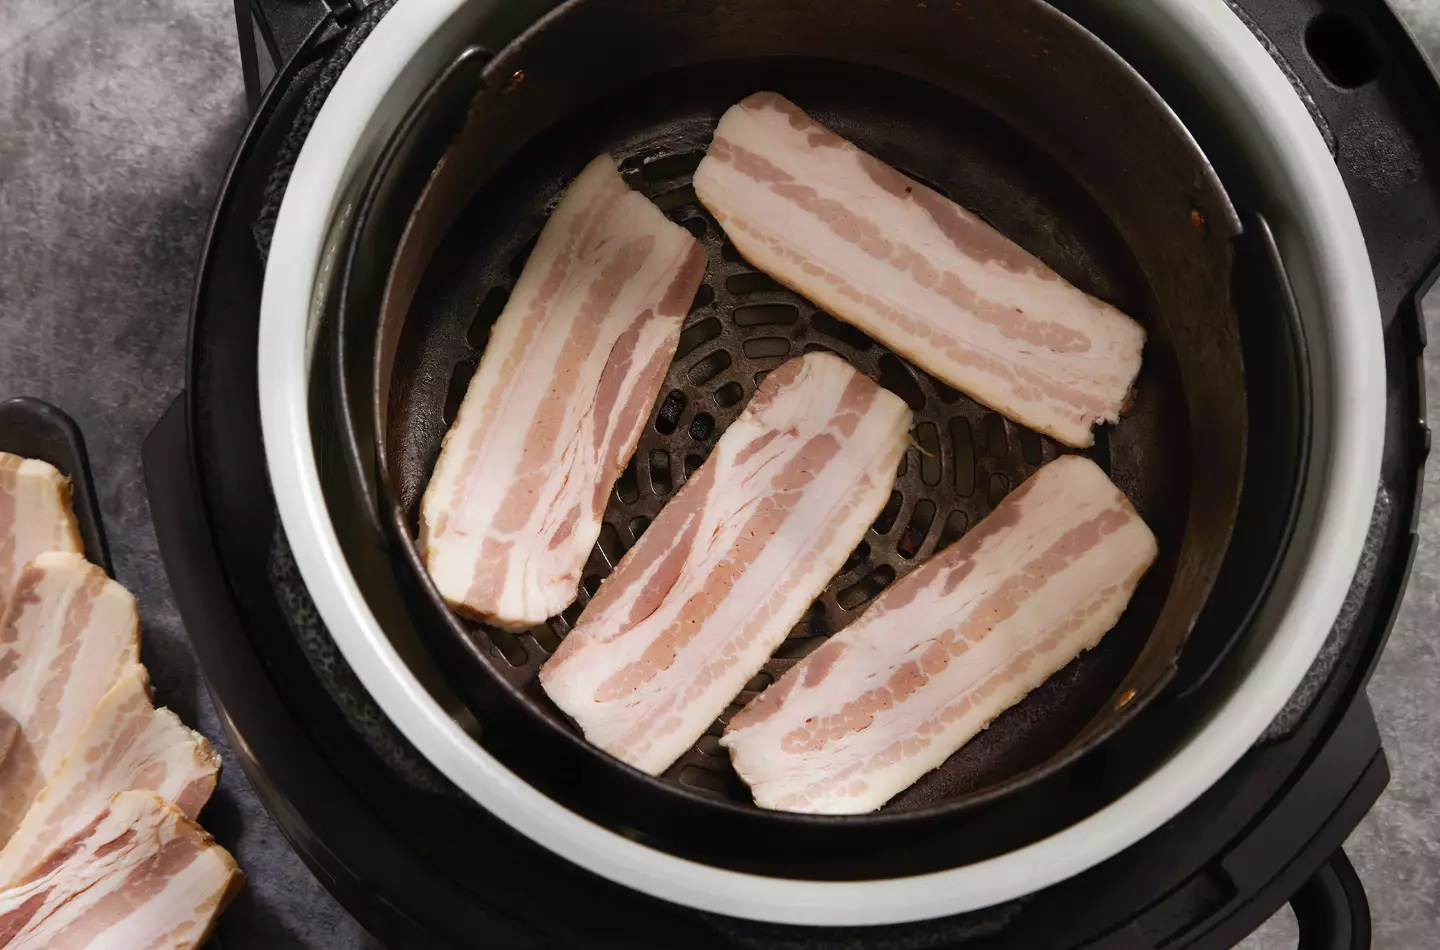 Bacon in the airfryer should be avoided at all costs. (LauriPatterson/Getty)